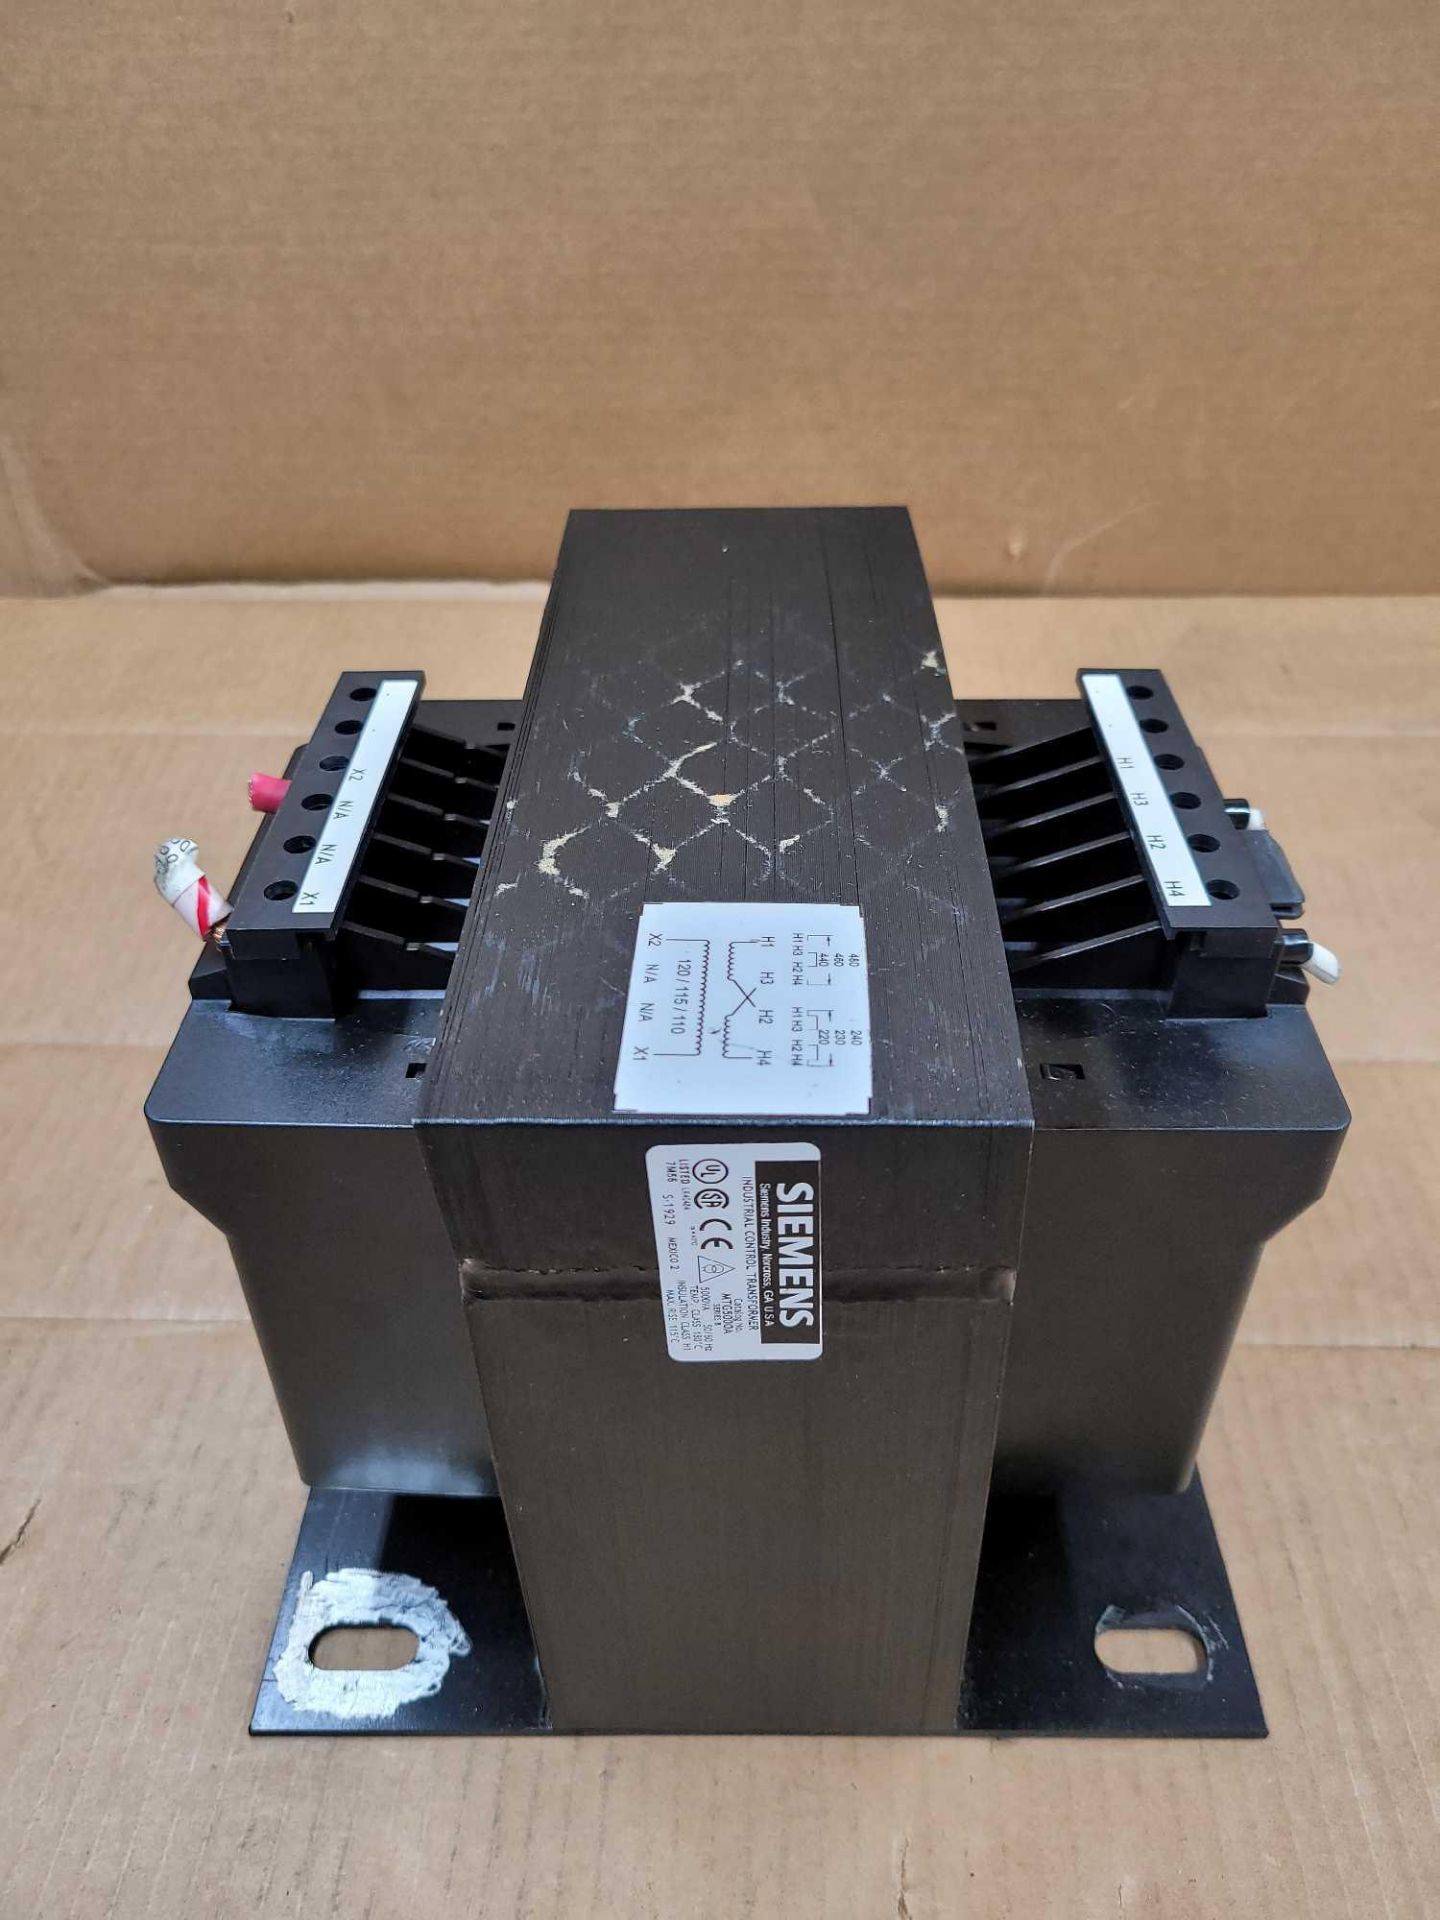 SIEMENS MTG5000A / Series B Industrial Control Transformer  /  Lot Weight: 73.6 lbs - Image 5 of 7